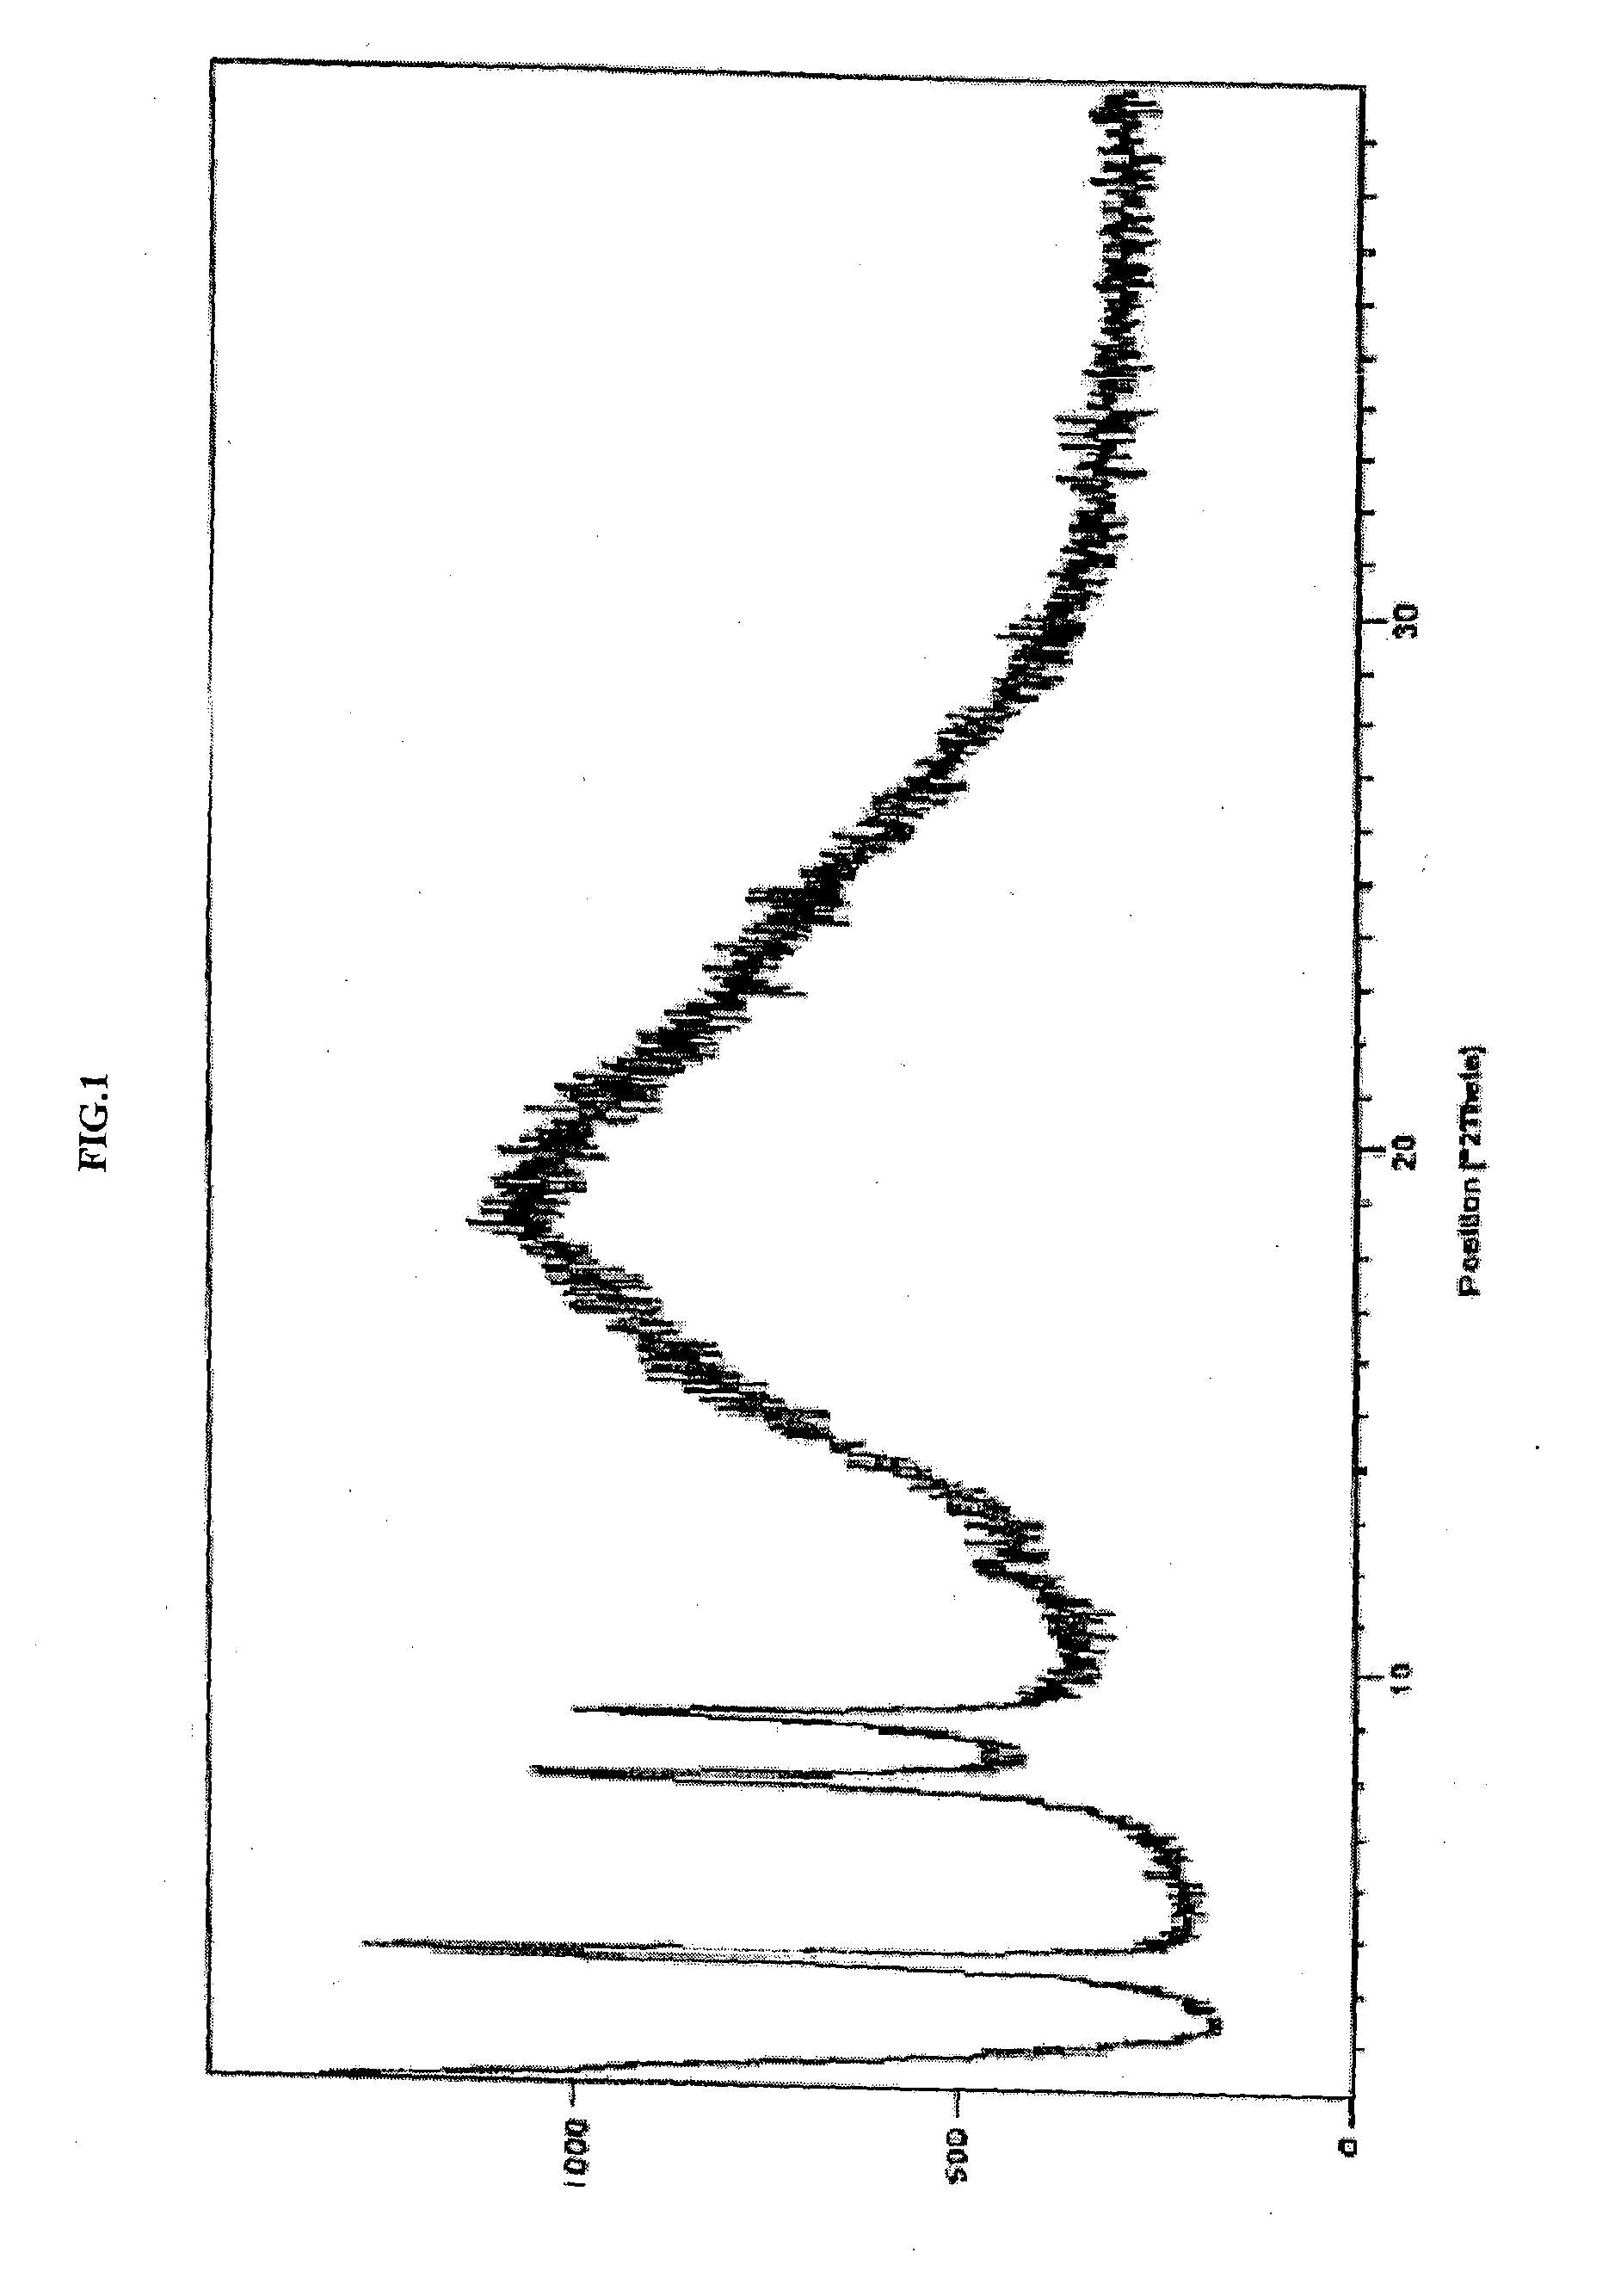 Polymorphic form of pyrrole derivative and intermediate thereof